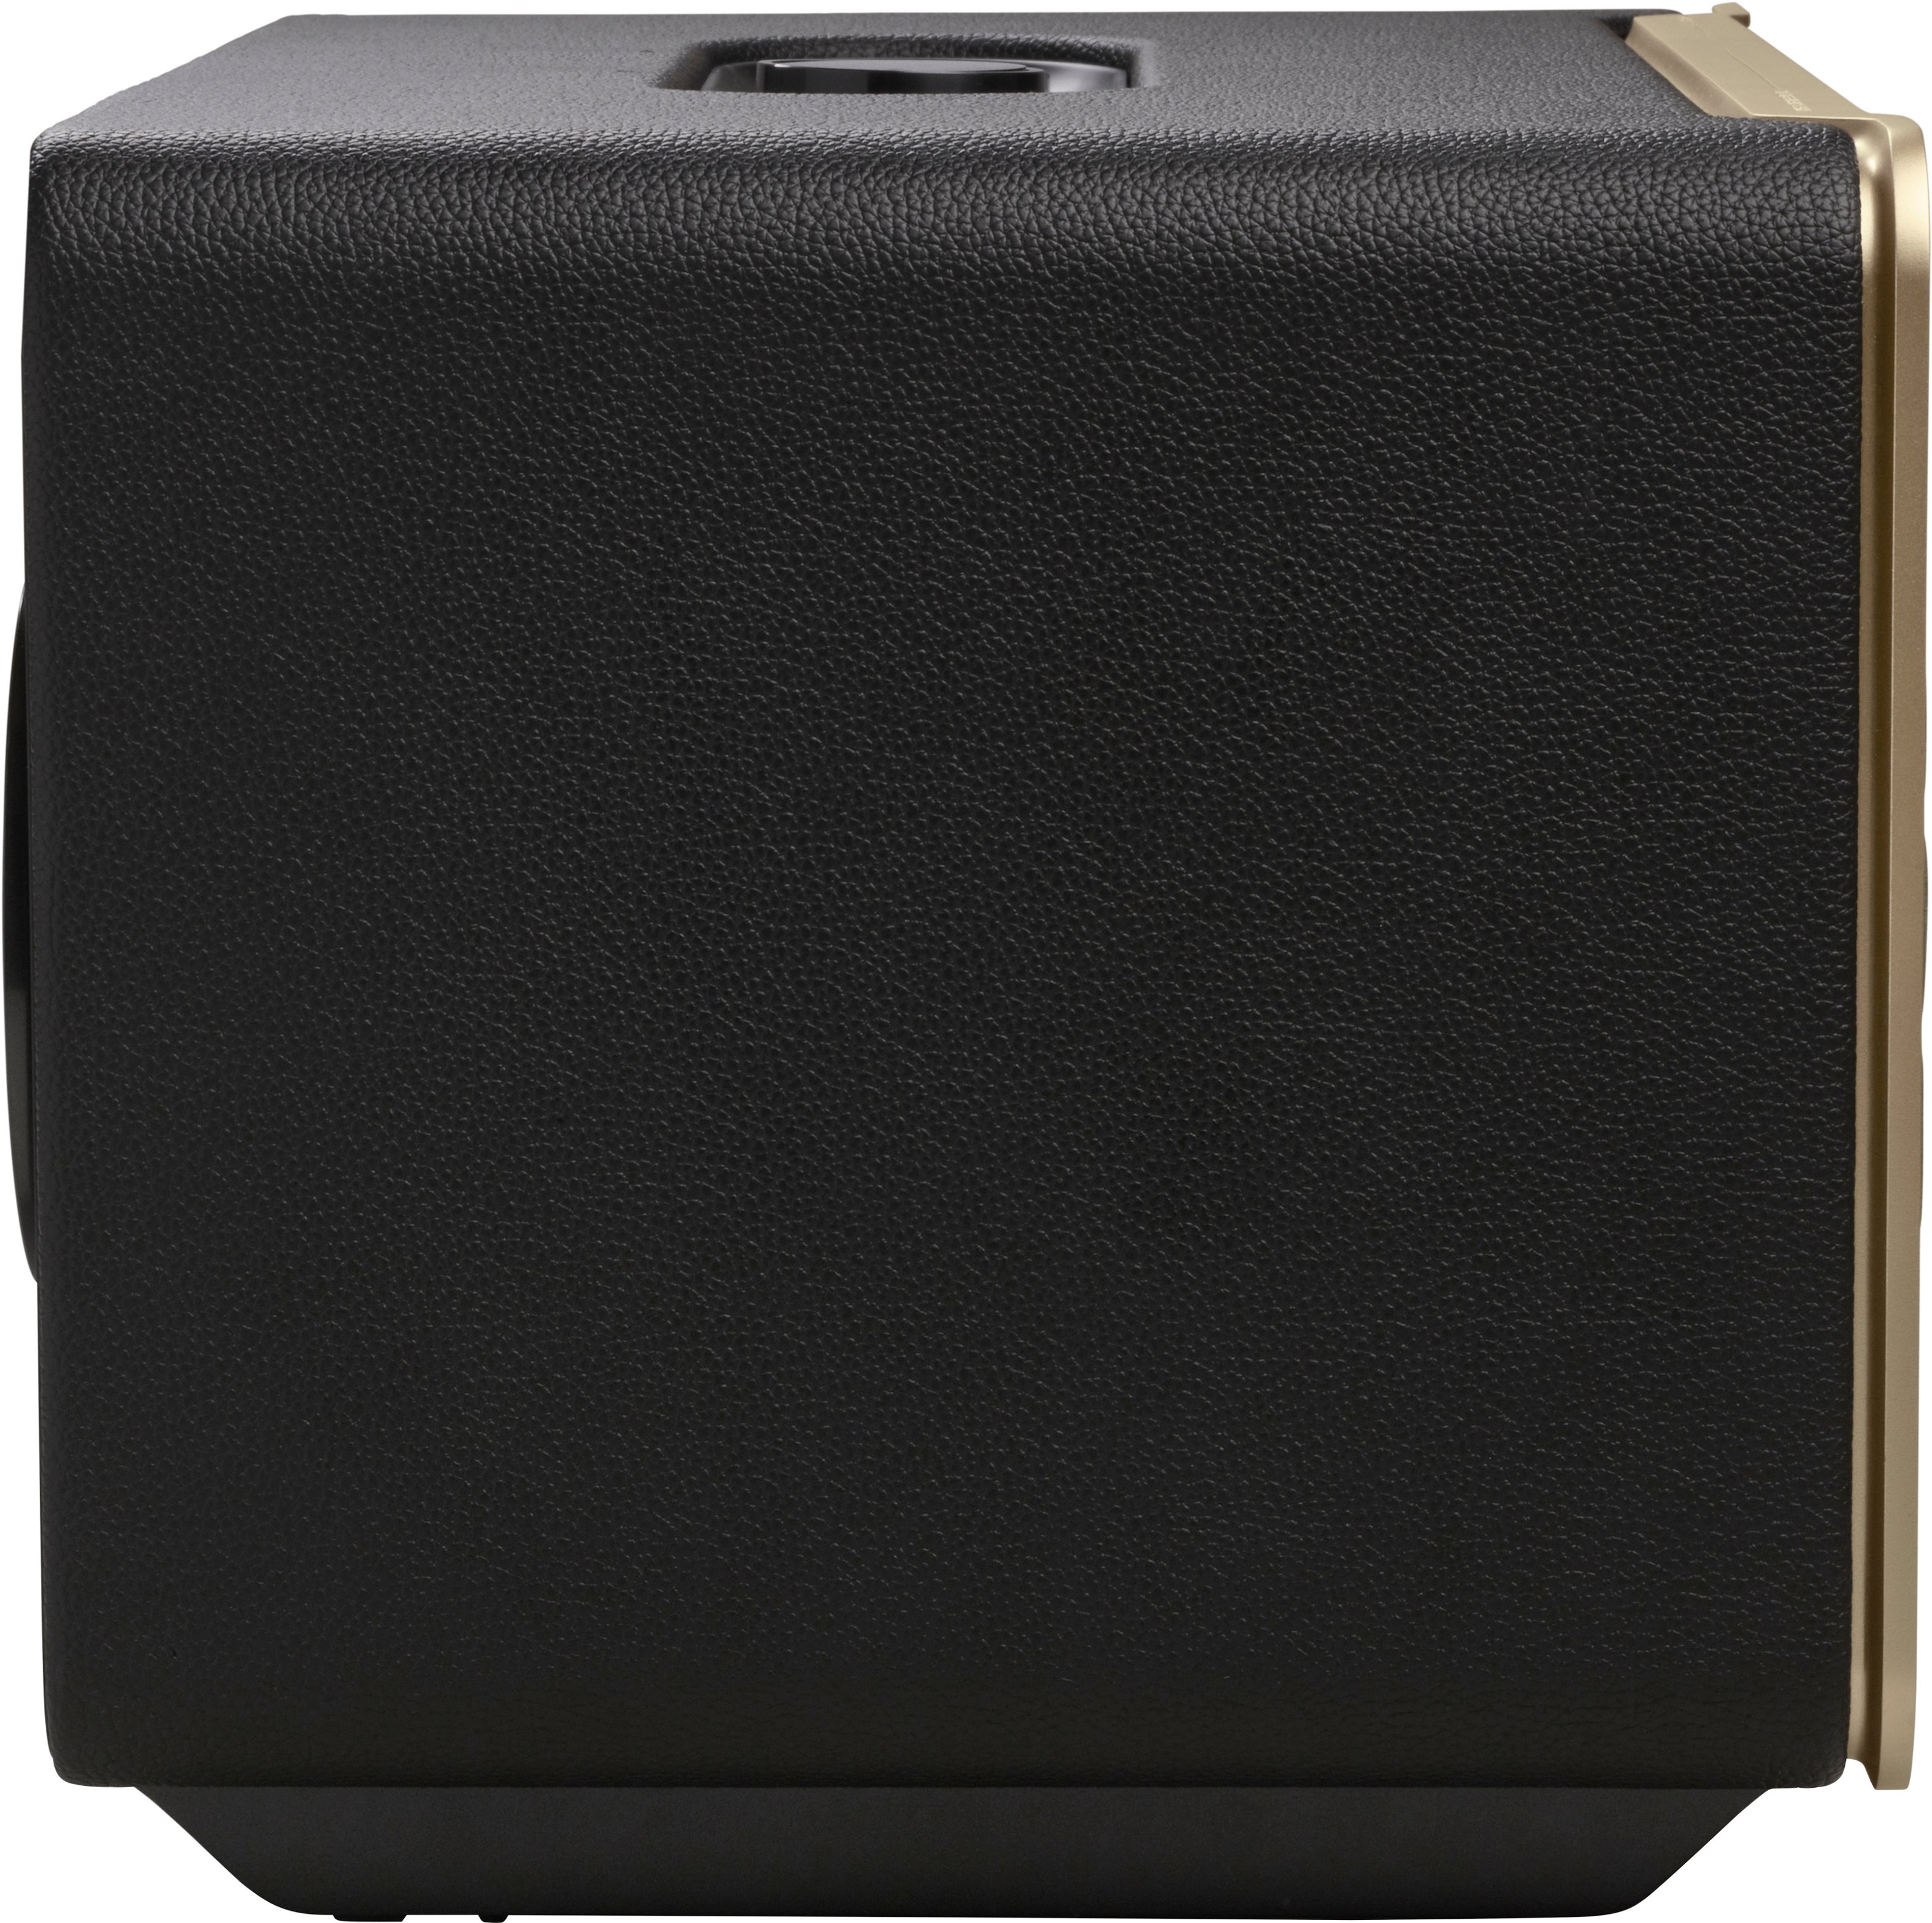 Purchase JBL Authentics 500 Hi-Fidelity Smart Home Speaker With Wi-Fi